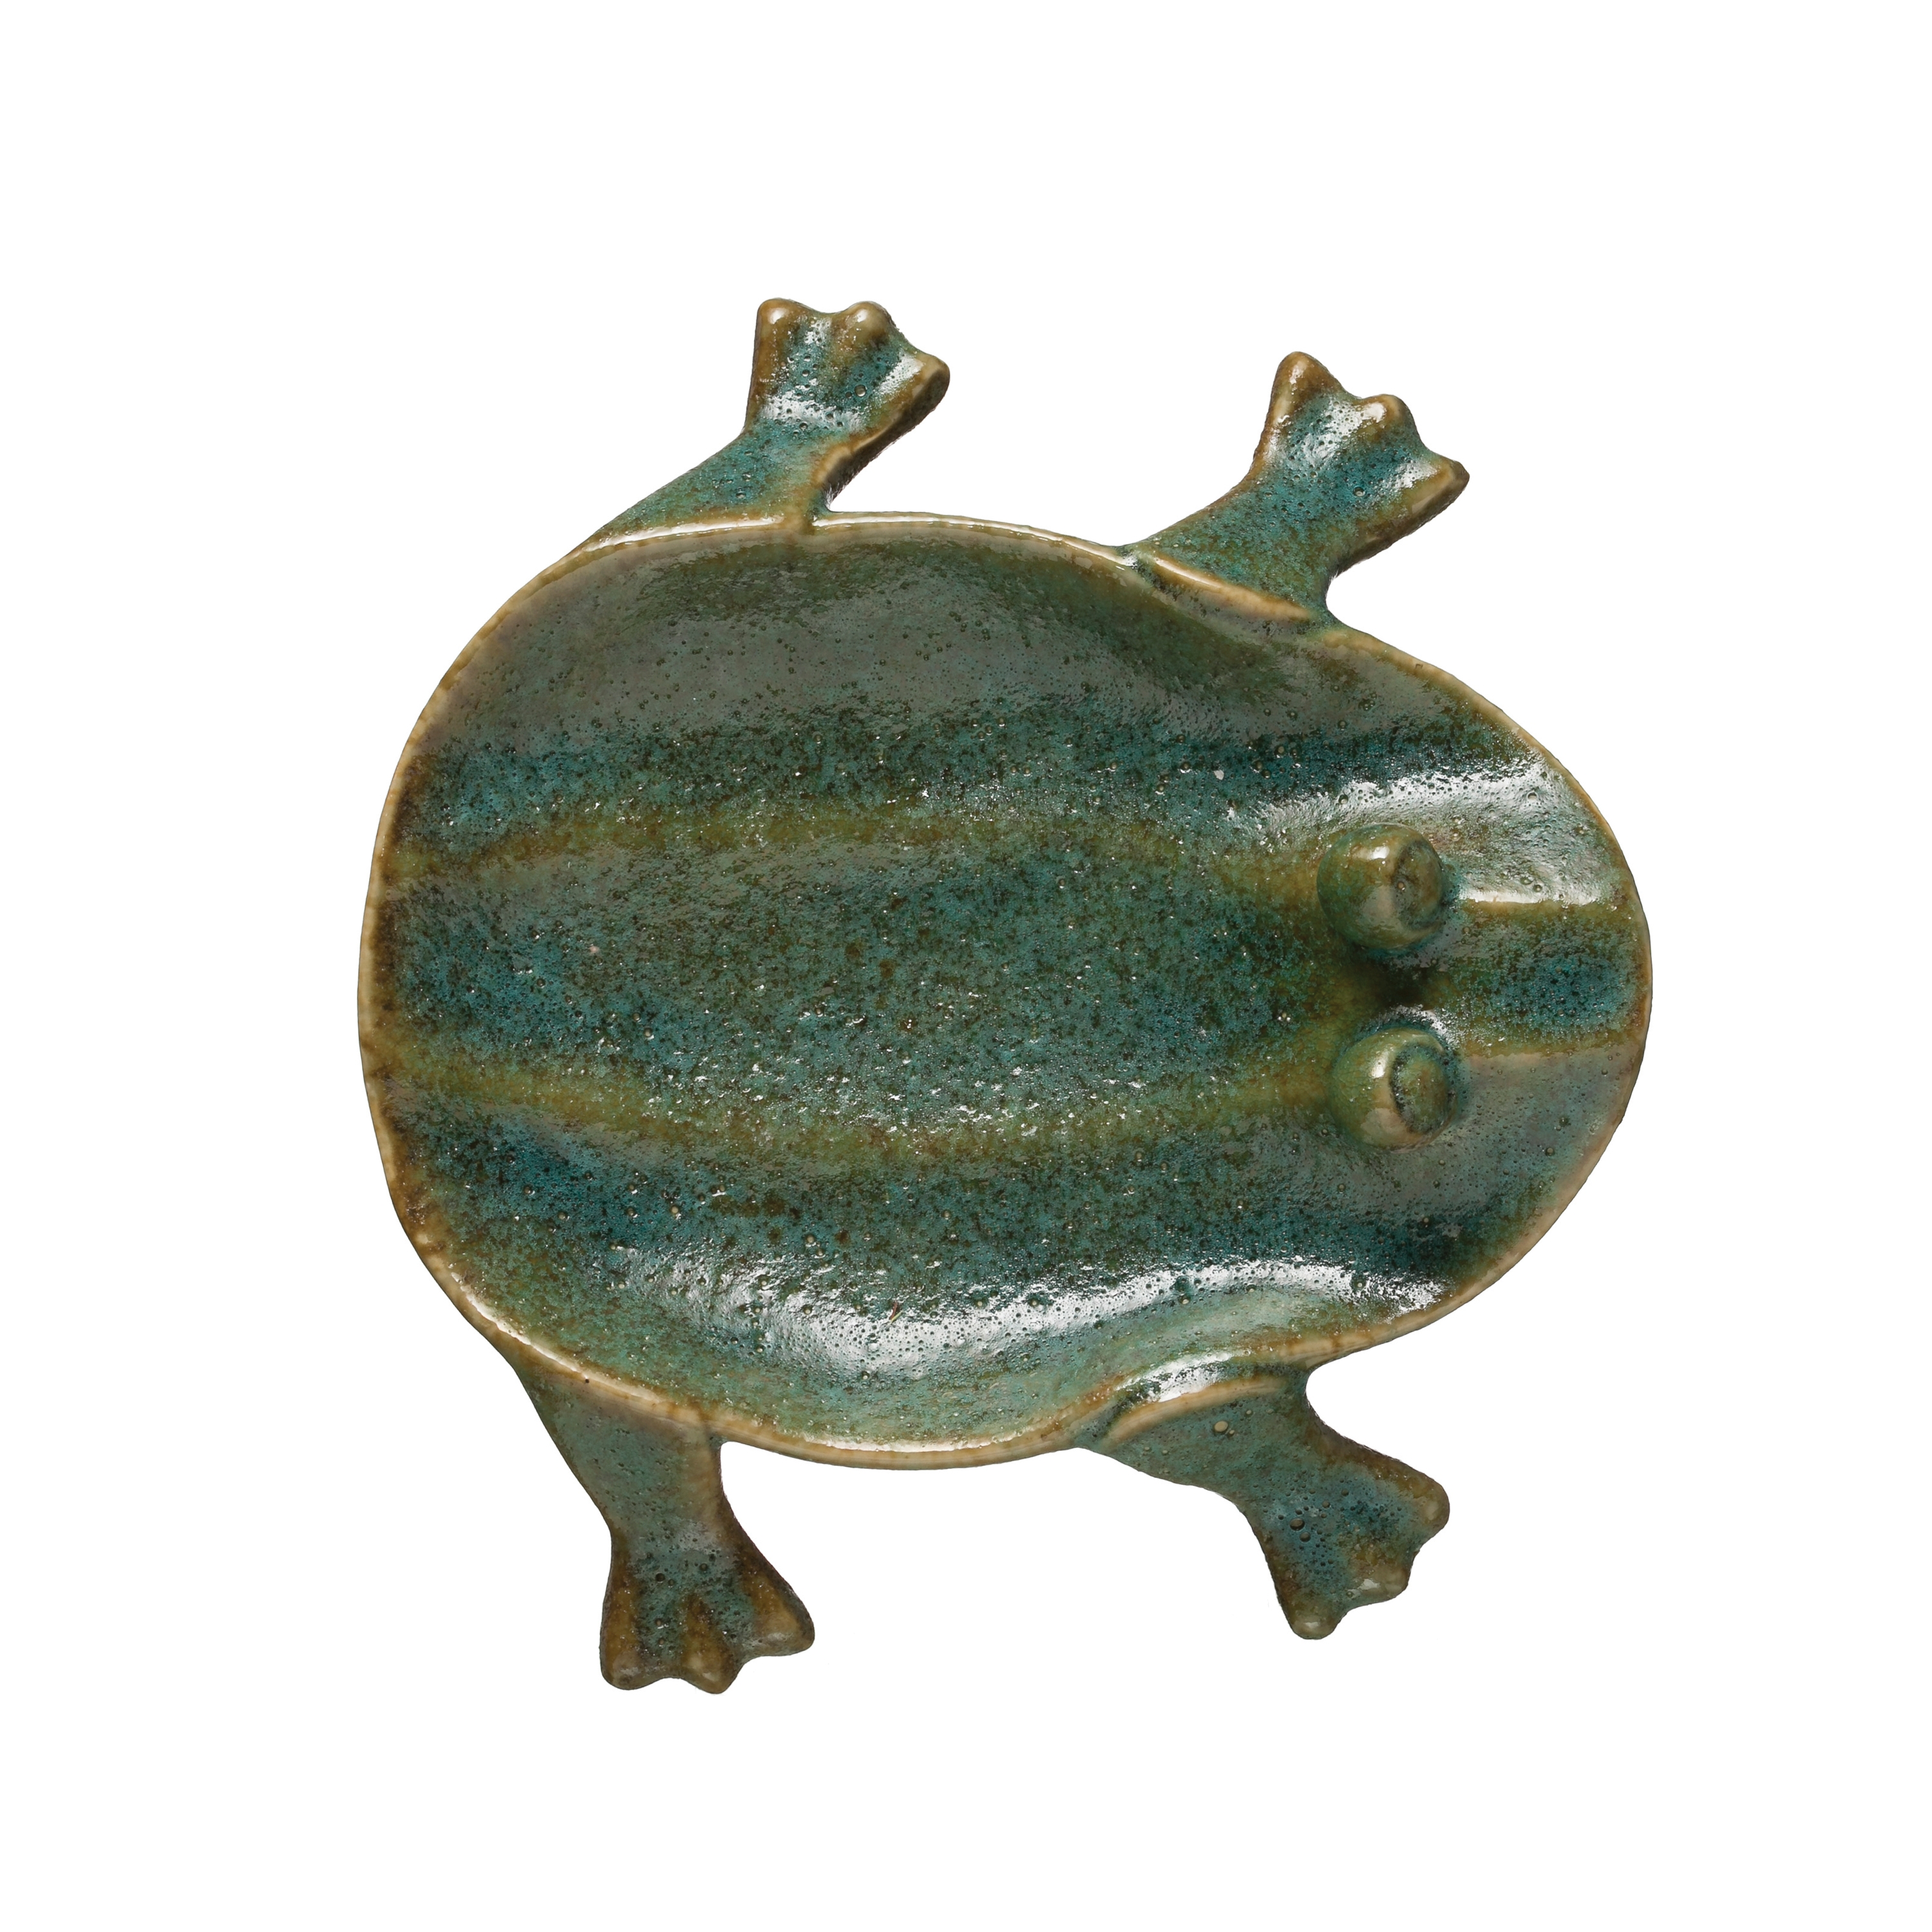 Decorative Footed Frog Dish with Reactive Glaze Finish (Each one will vary) - Image 0